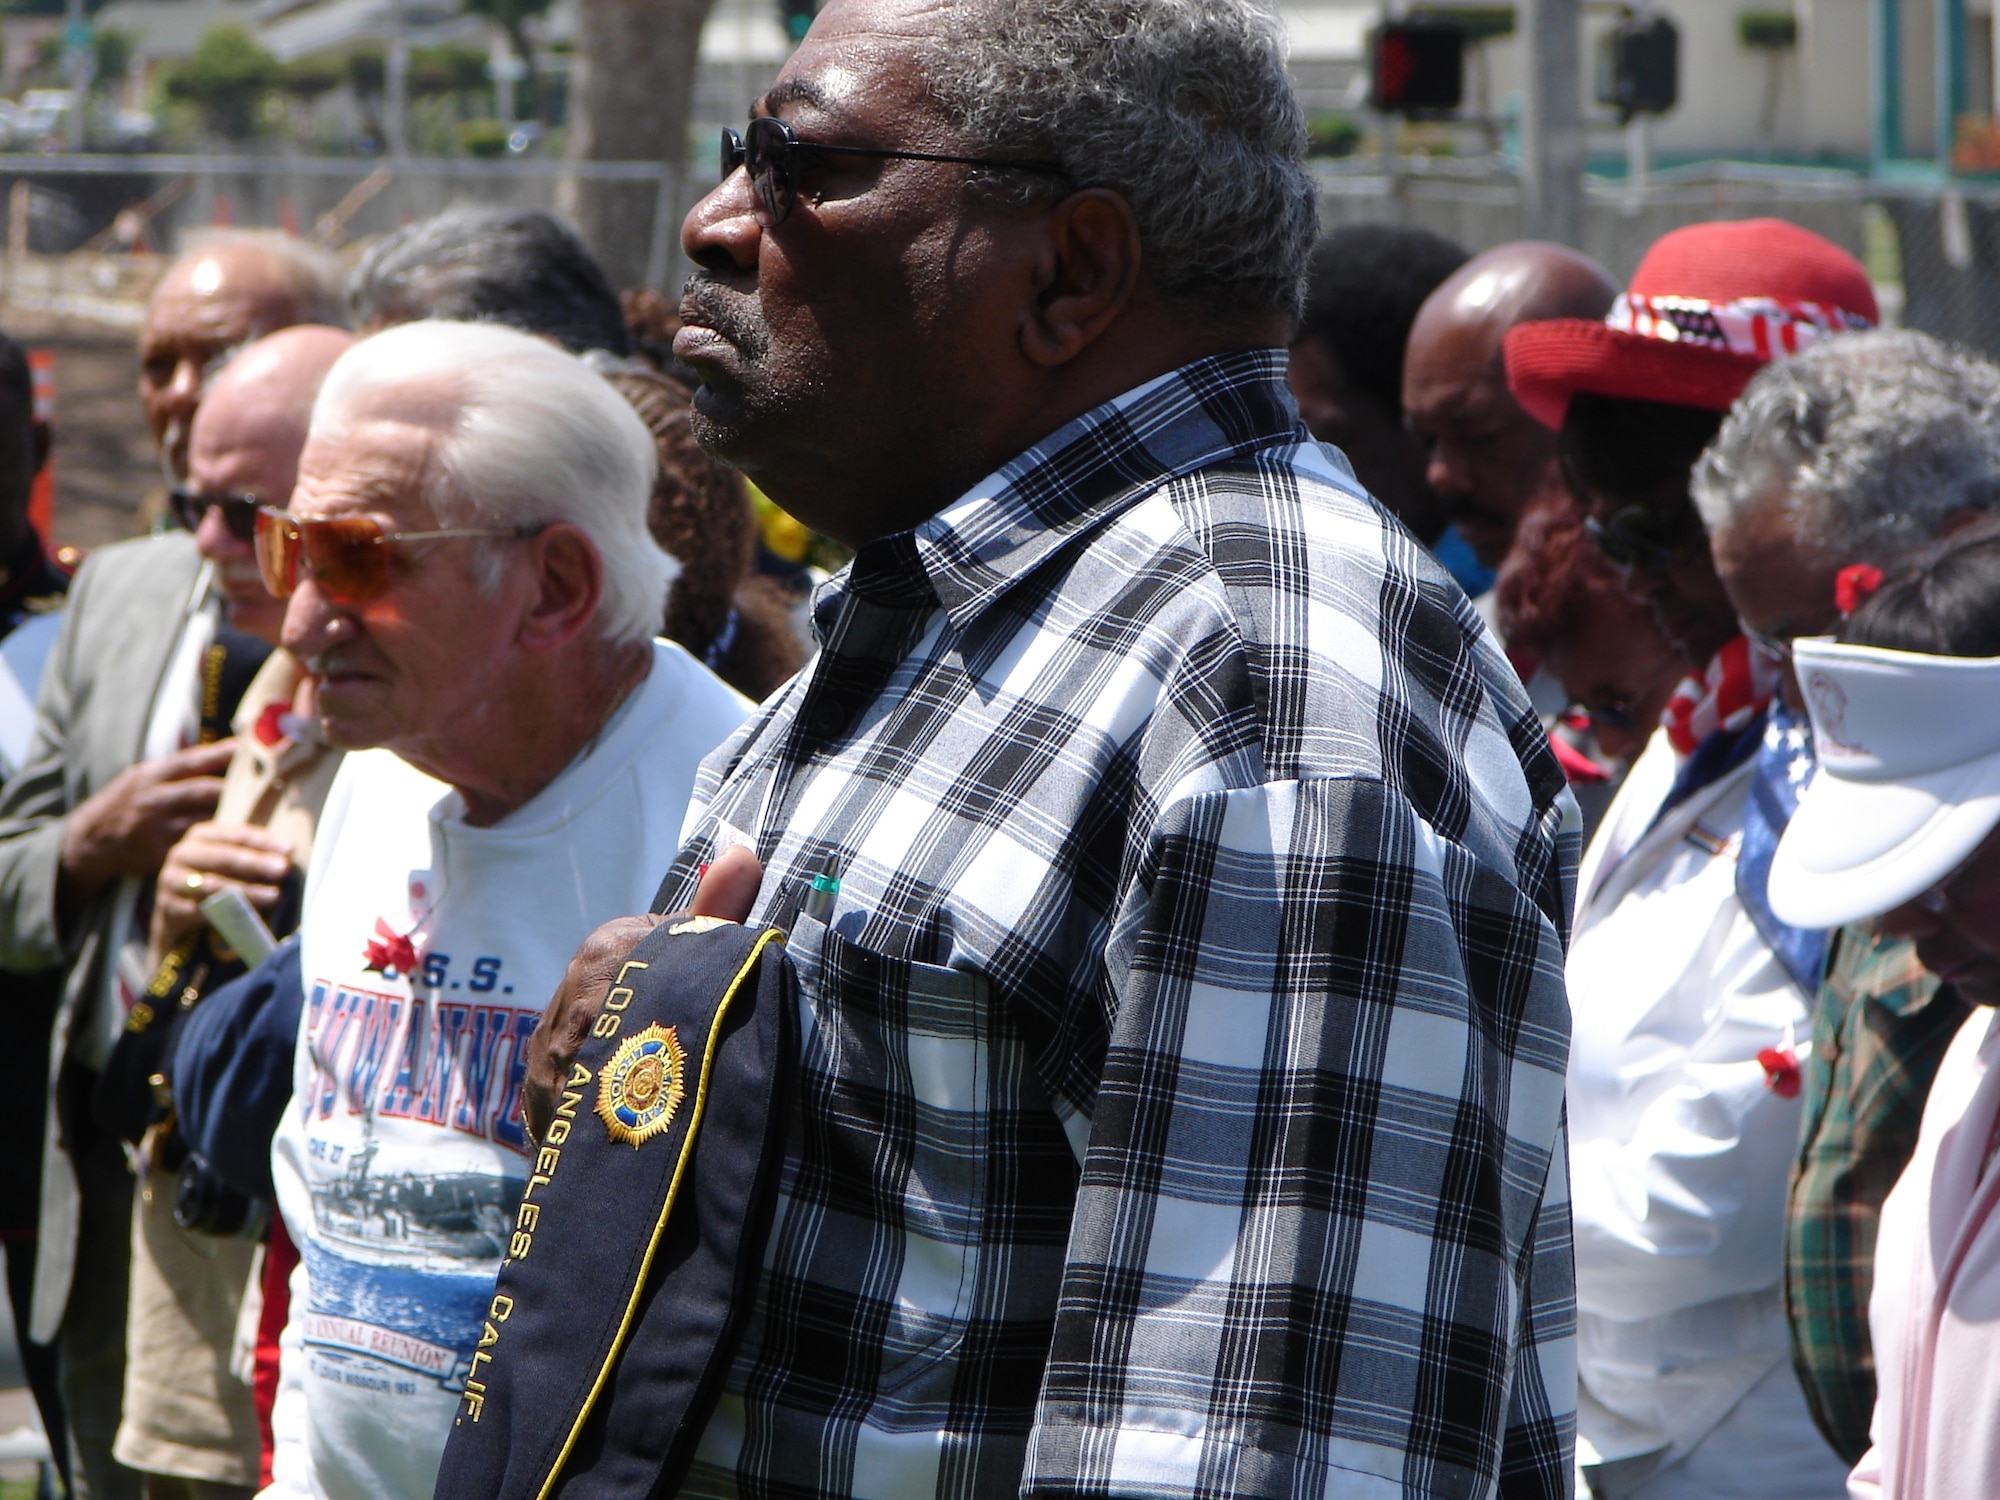 Veterans serving from World War II to Operation Iraqi Freedom attended the 59th Annual Inglewood Memorial Day Service, May 28. The service honored fallen heroes from the city. Col. Douglas Kendall, Spacelift Range Group Commander was the keynote speaker at the event.